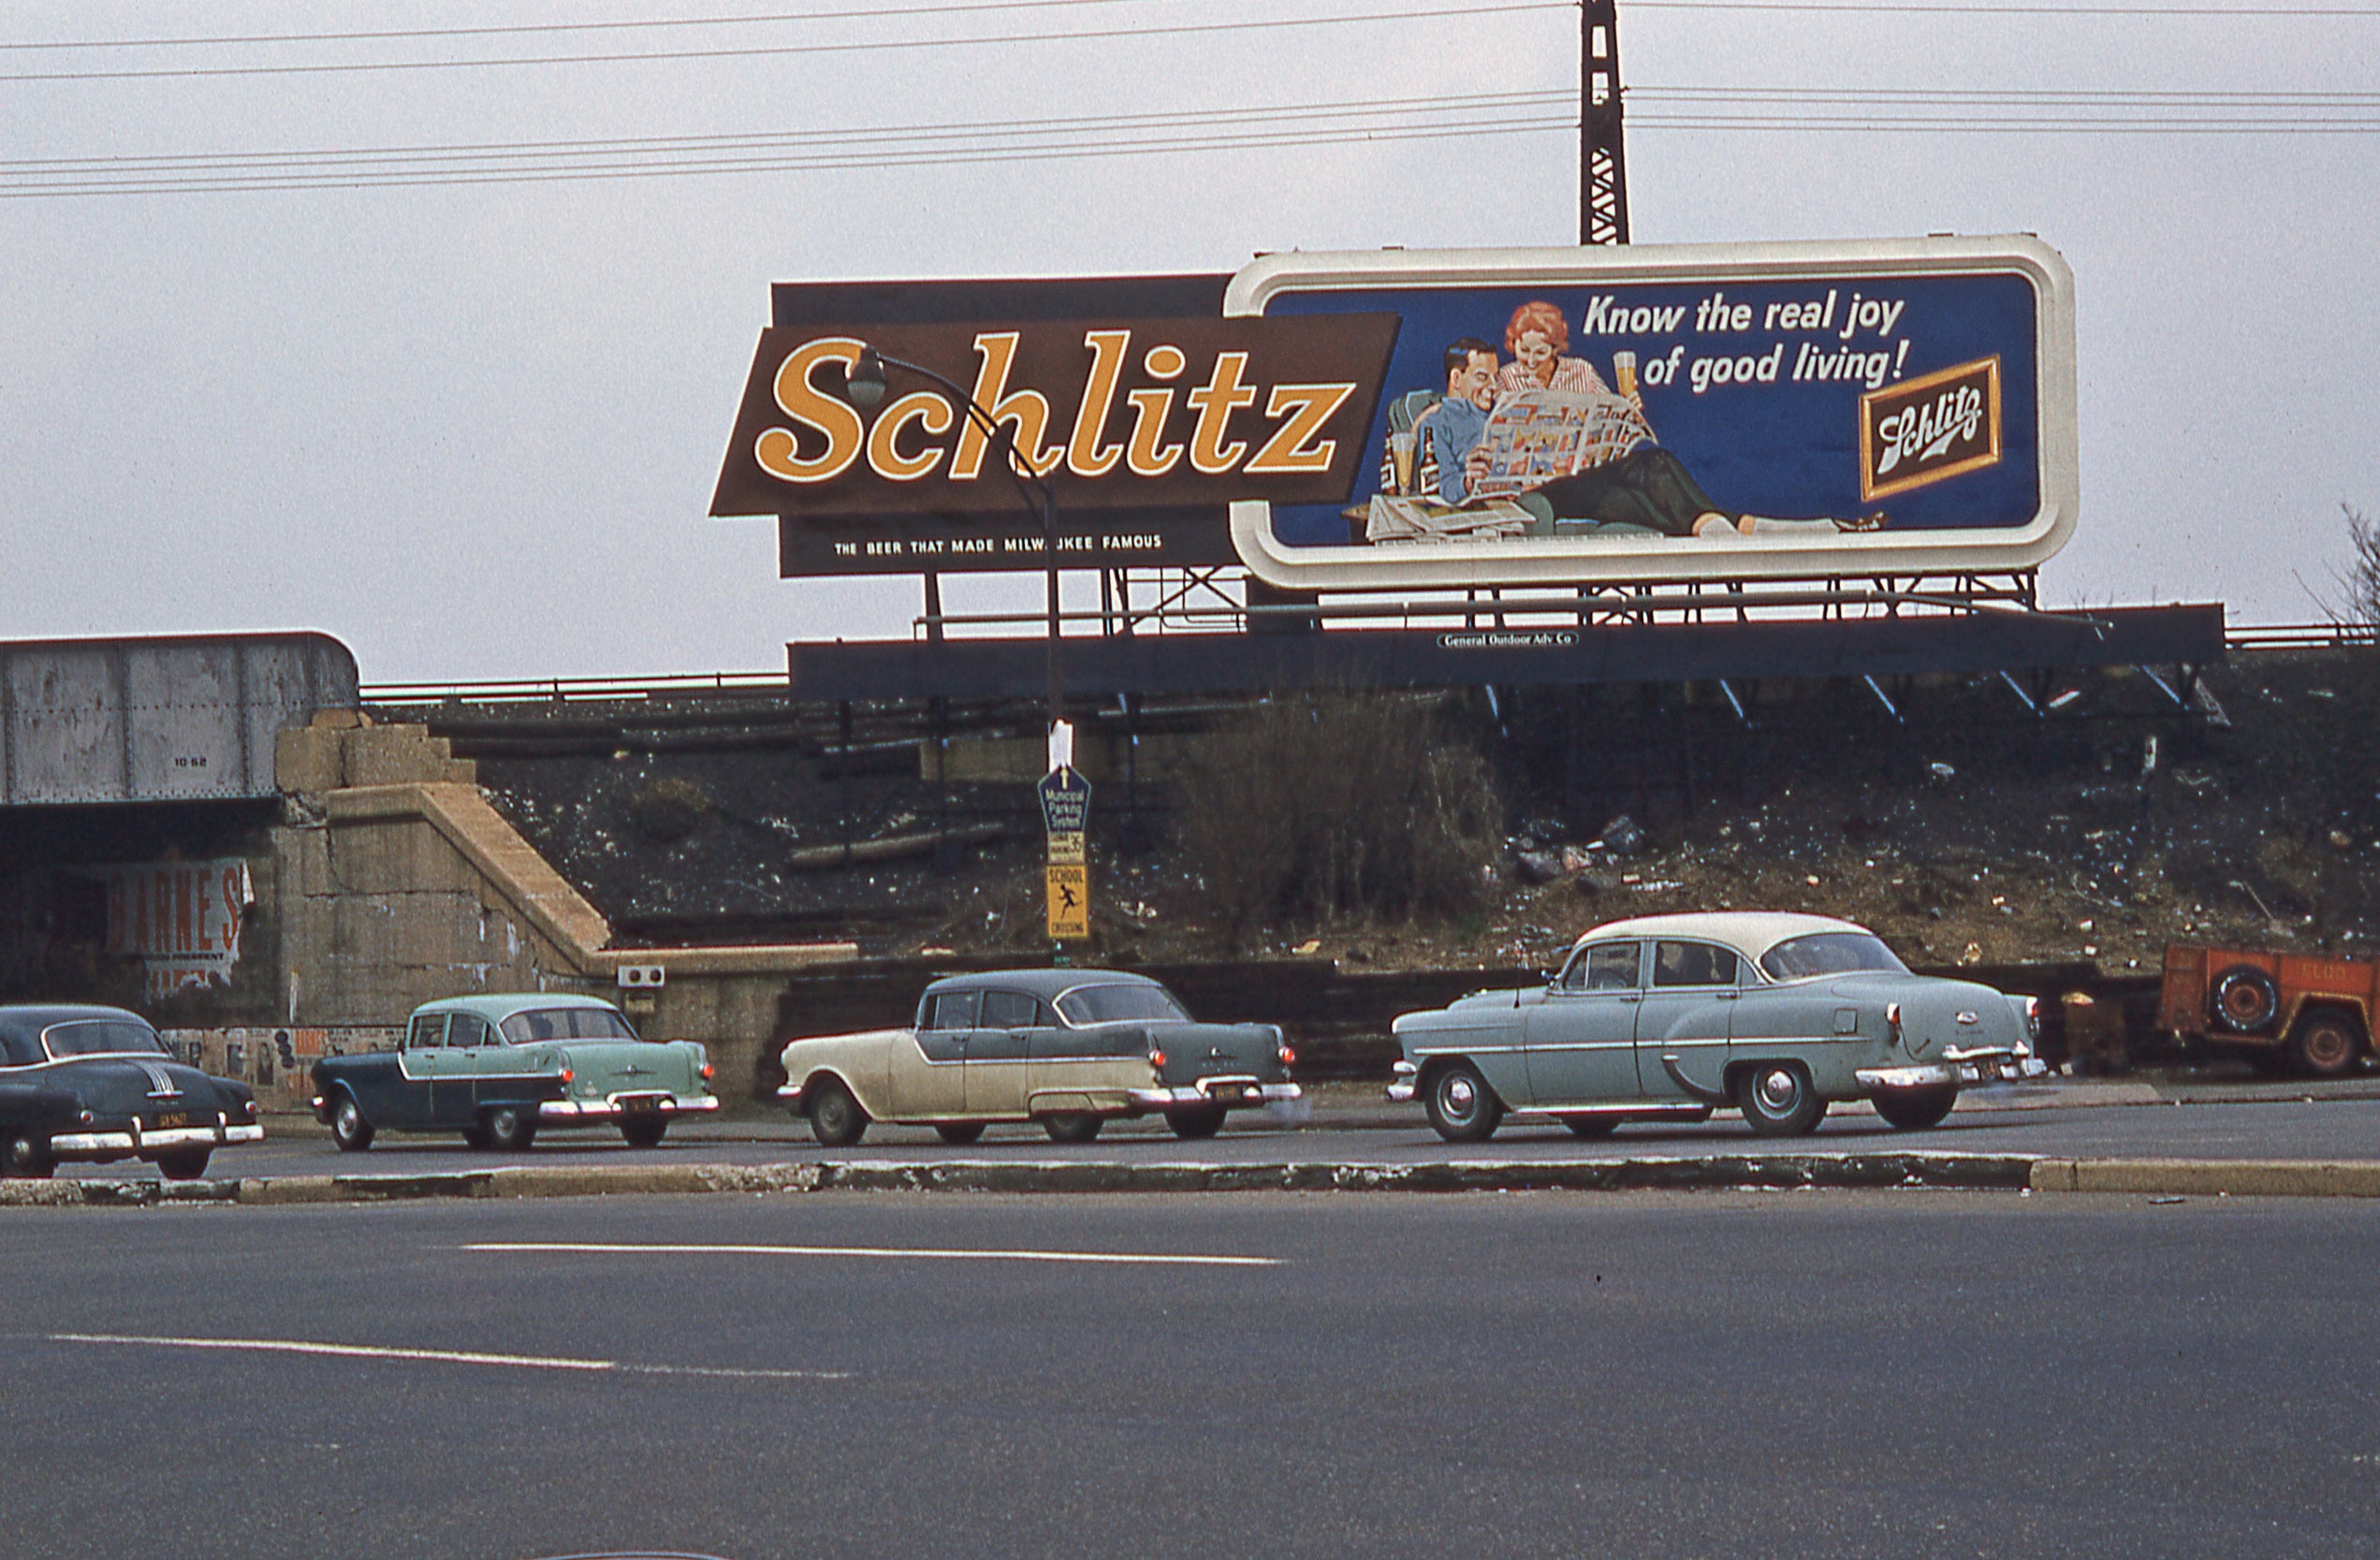 A Schlitz billboard sign above a highway in the 70s